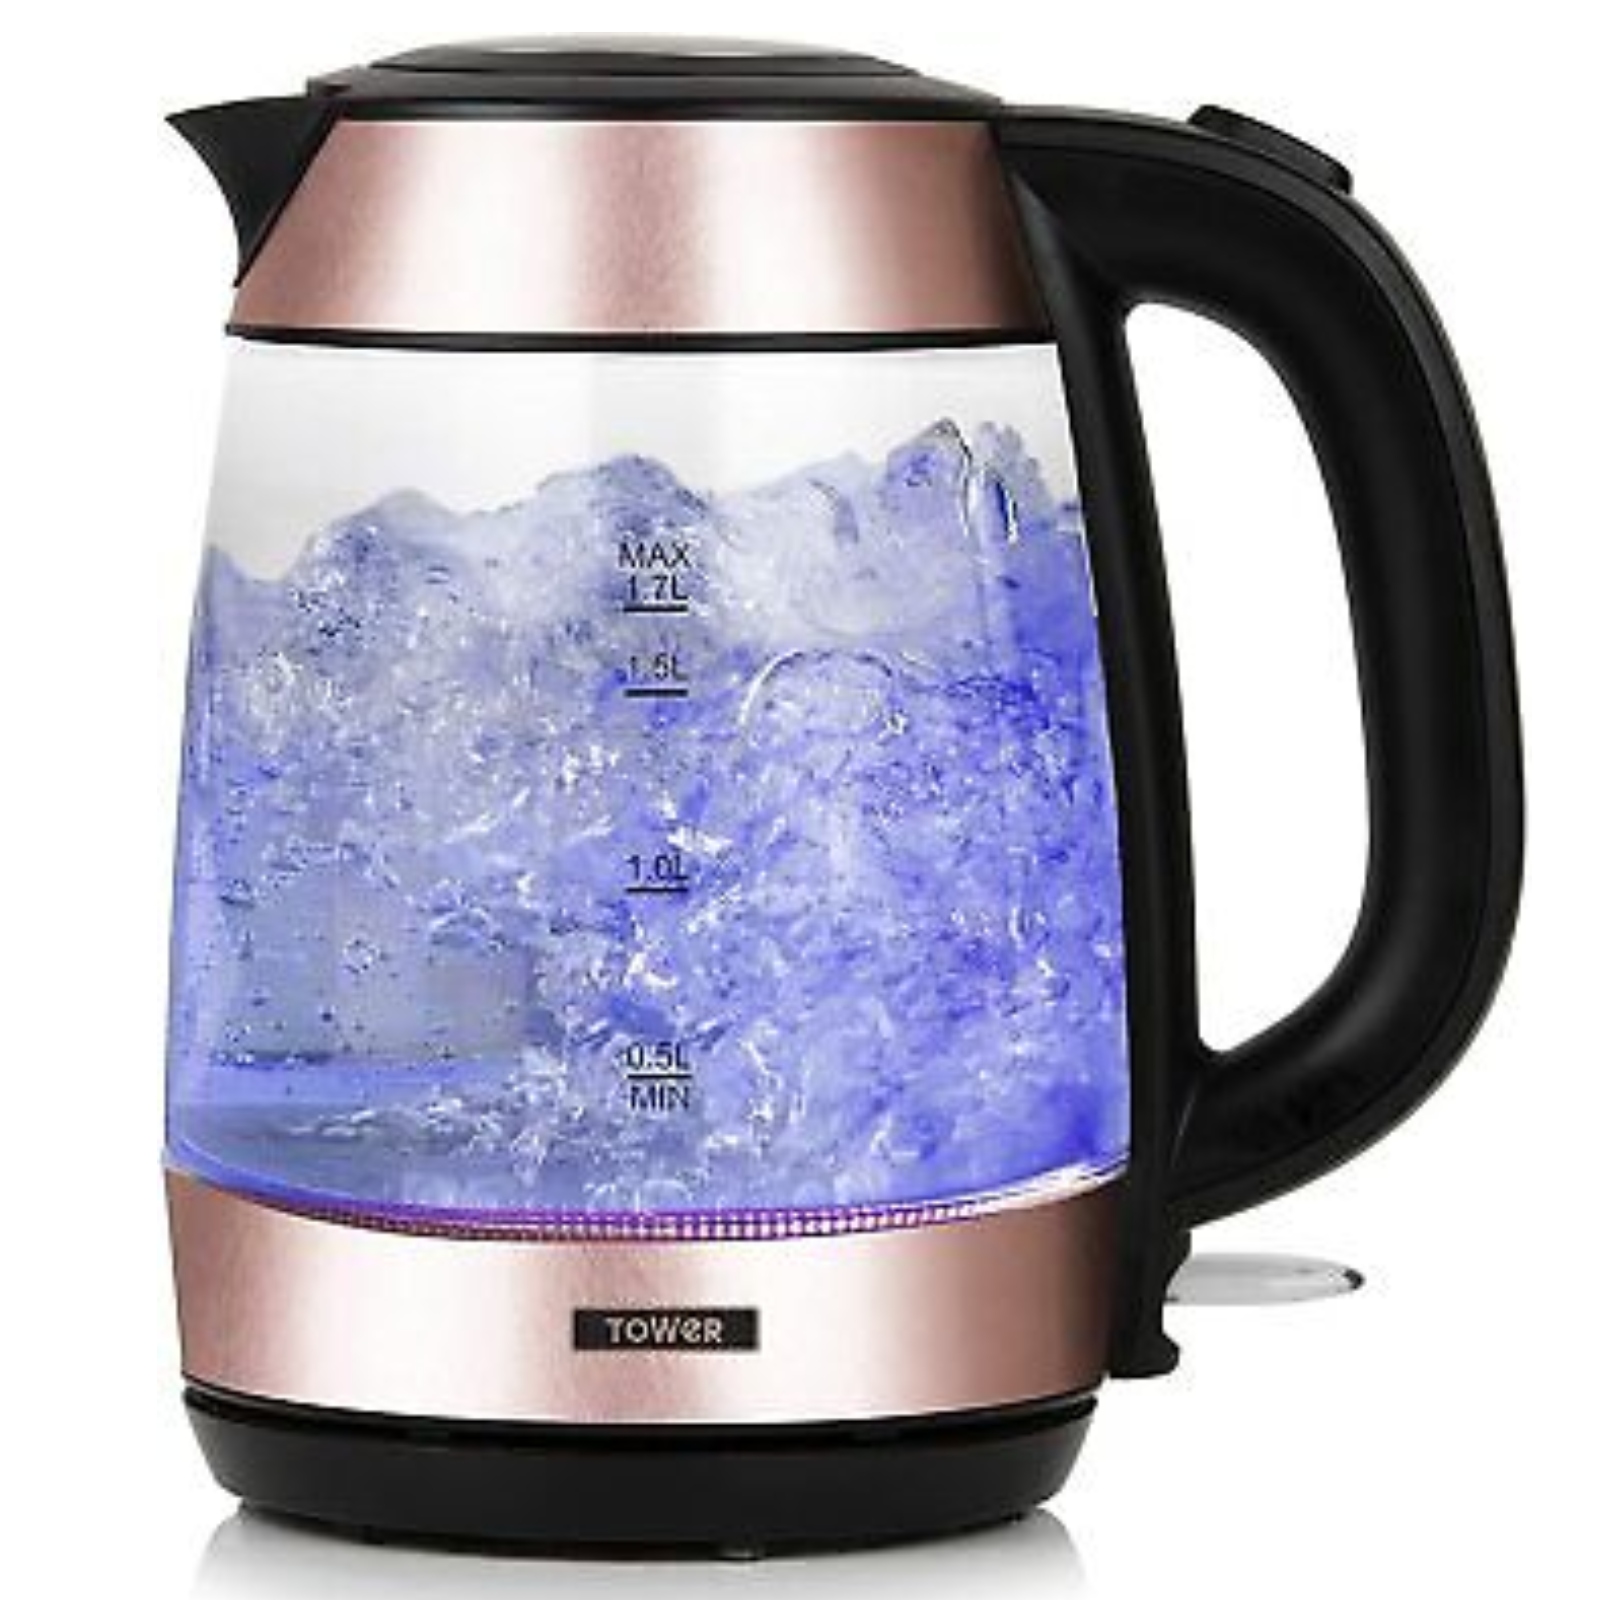 Tower Fast Boil Glass Kettle, Black and Rose Gold